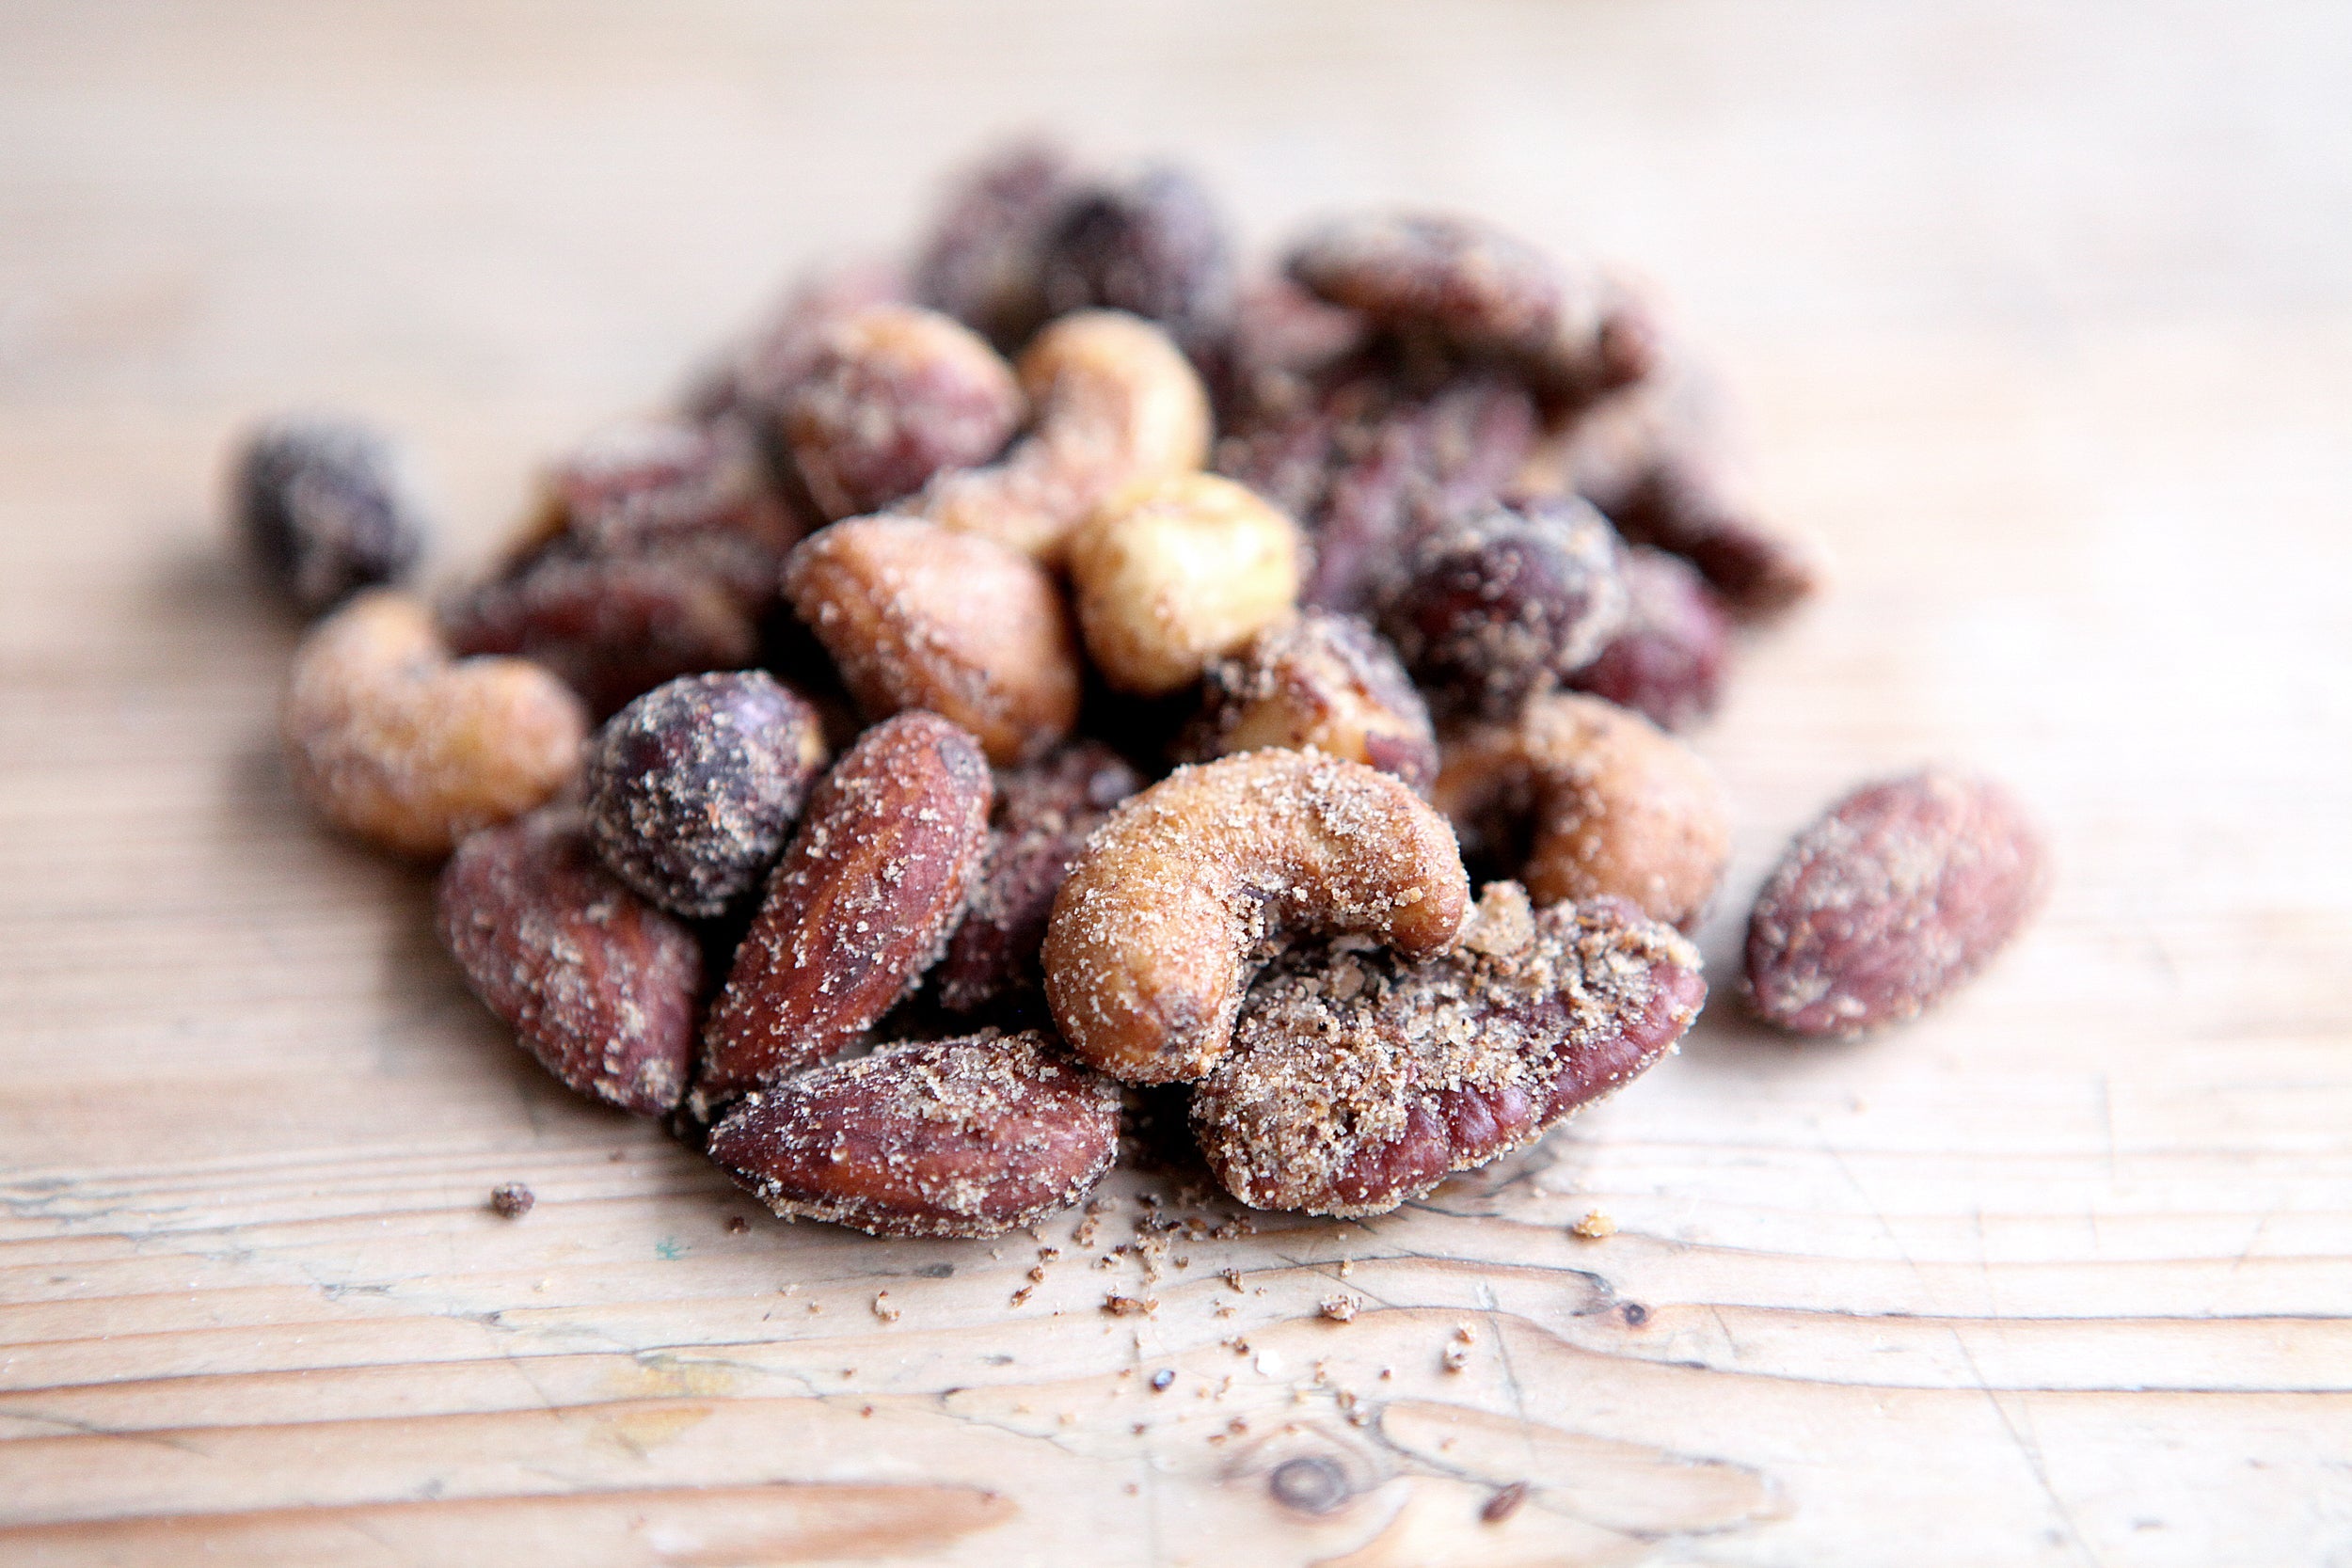 Spiced Smoked Mixed Nuts - 100g